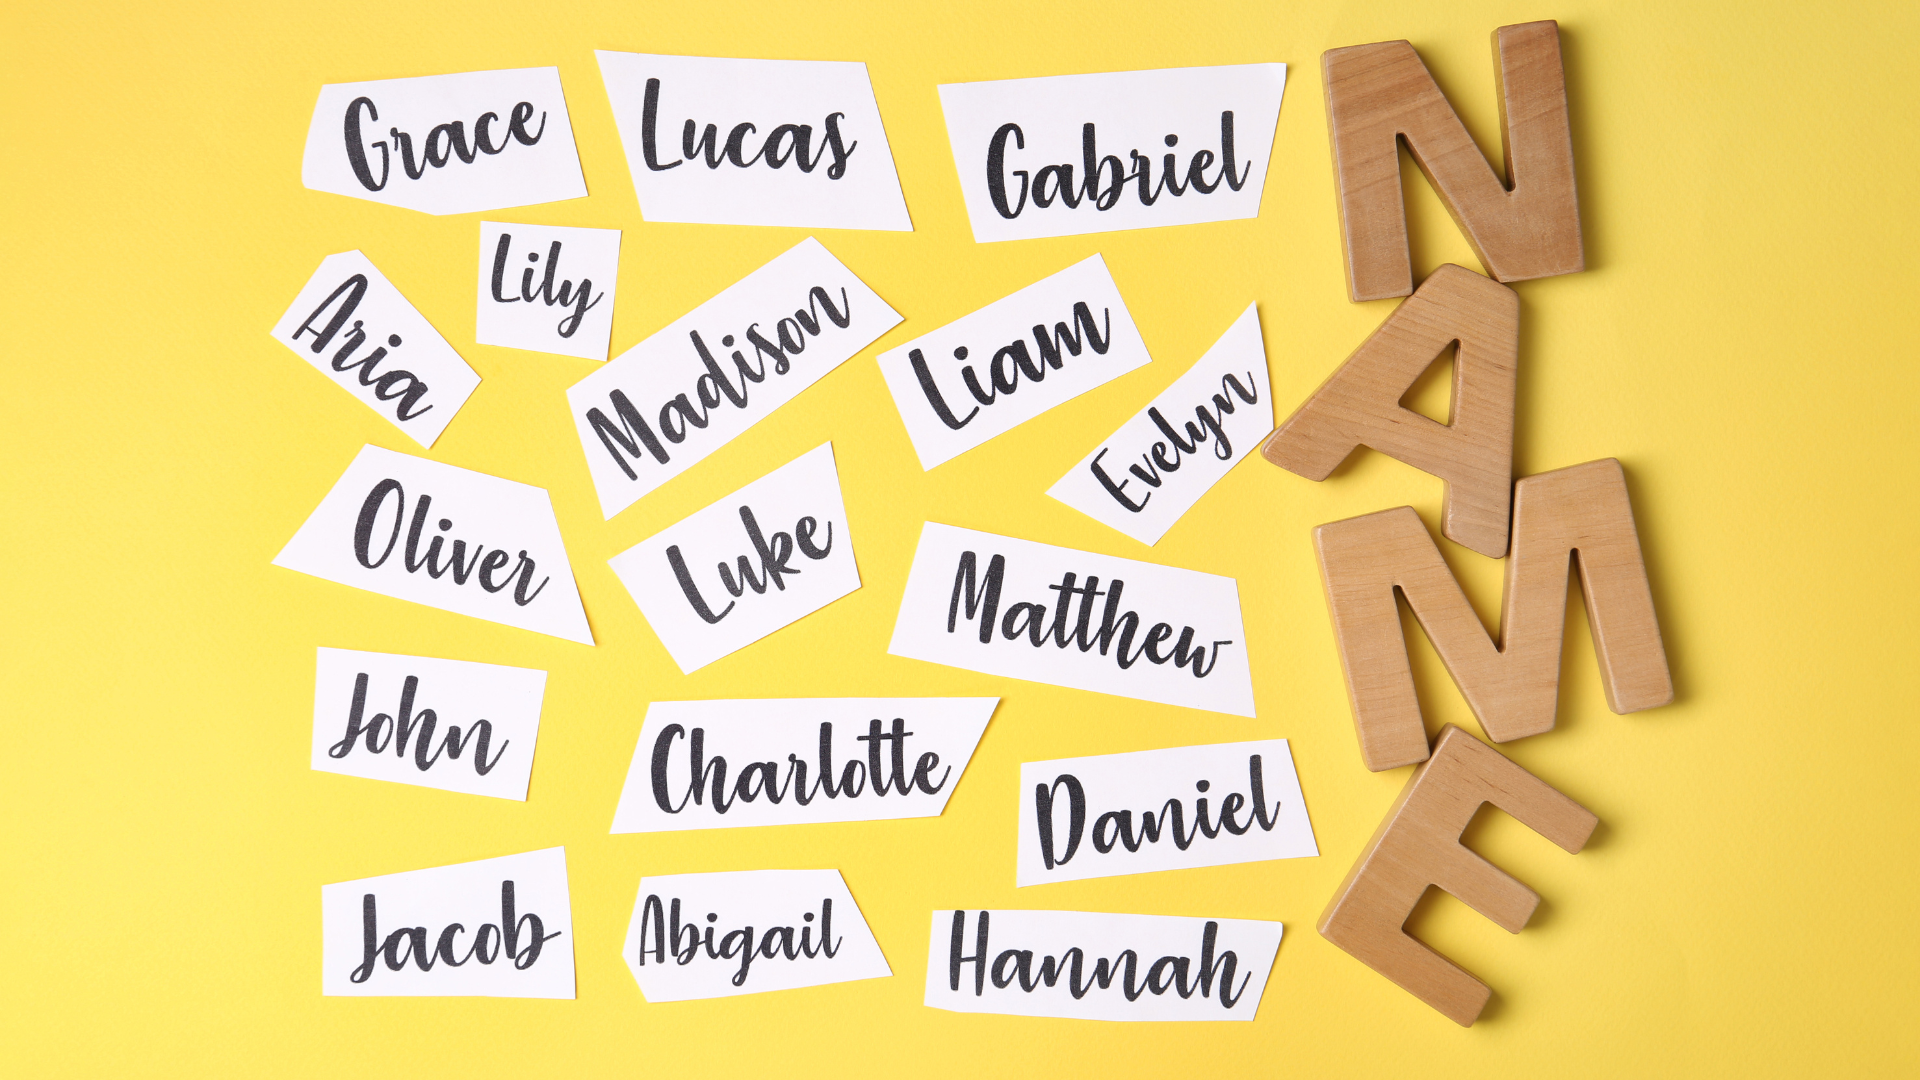 Names on a yellow background.